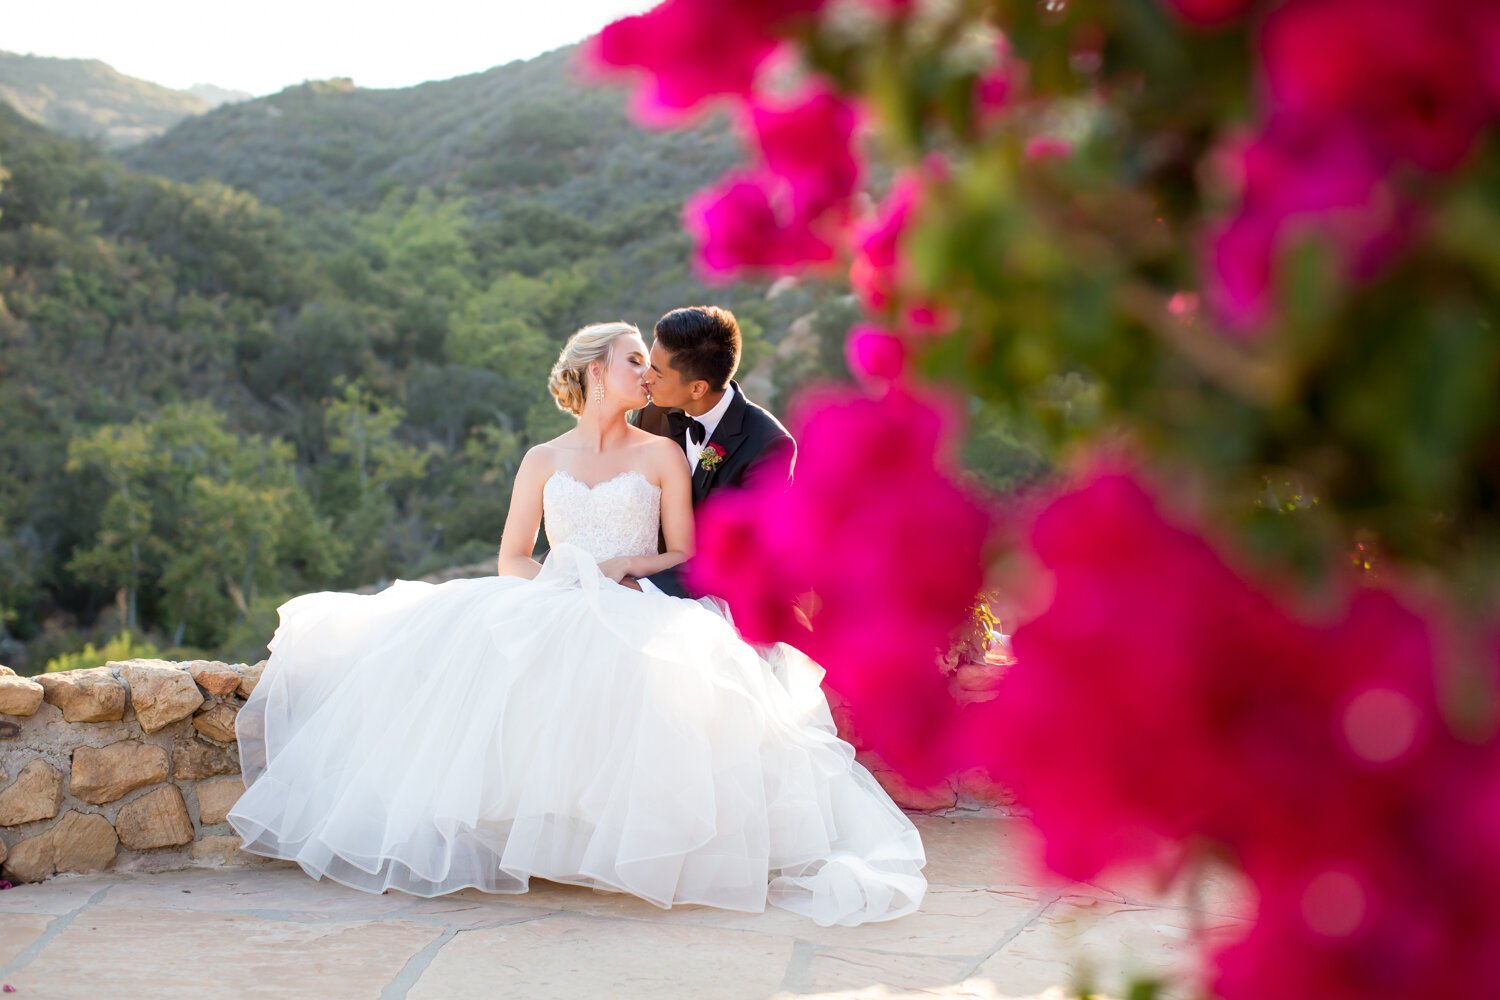 www.santabarbarawedding.com | APEX Malibu | Elizabeth Victoria Photography | Ebeling Events | Flowers by Maria | Malibu Clothes | BHLDN | Bride and Groom with Mountains in Background